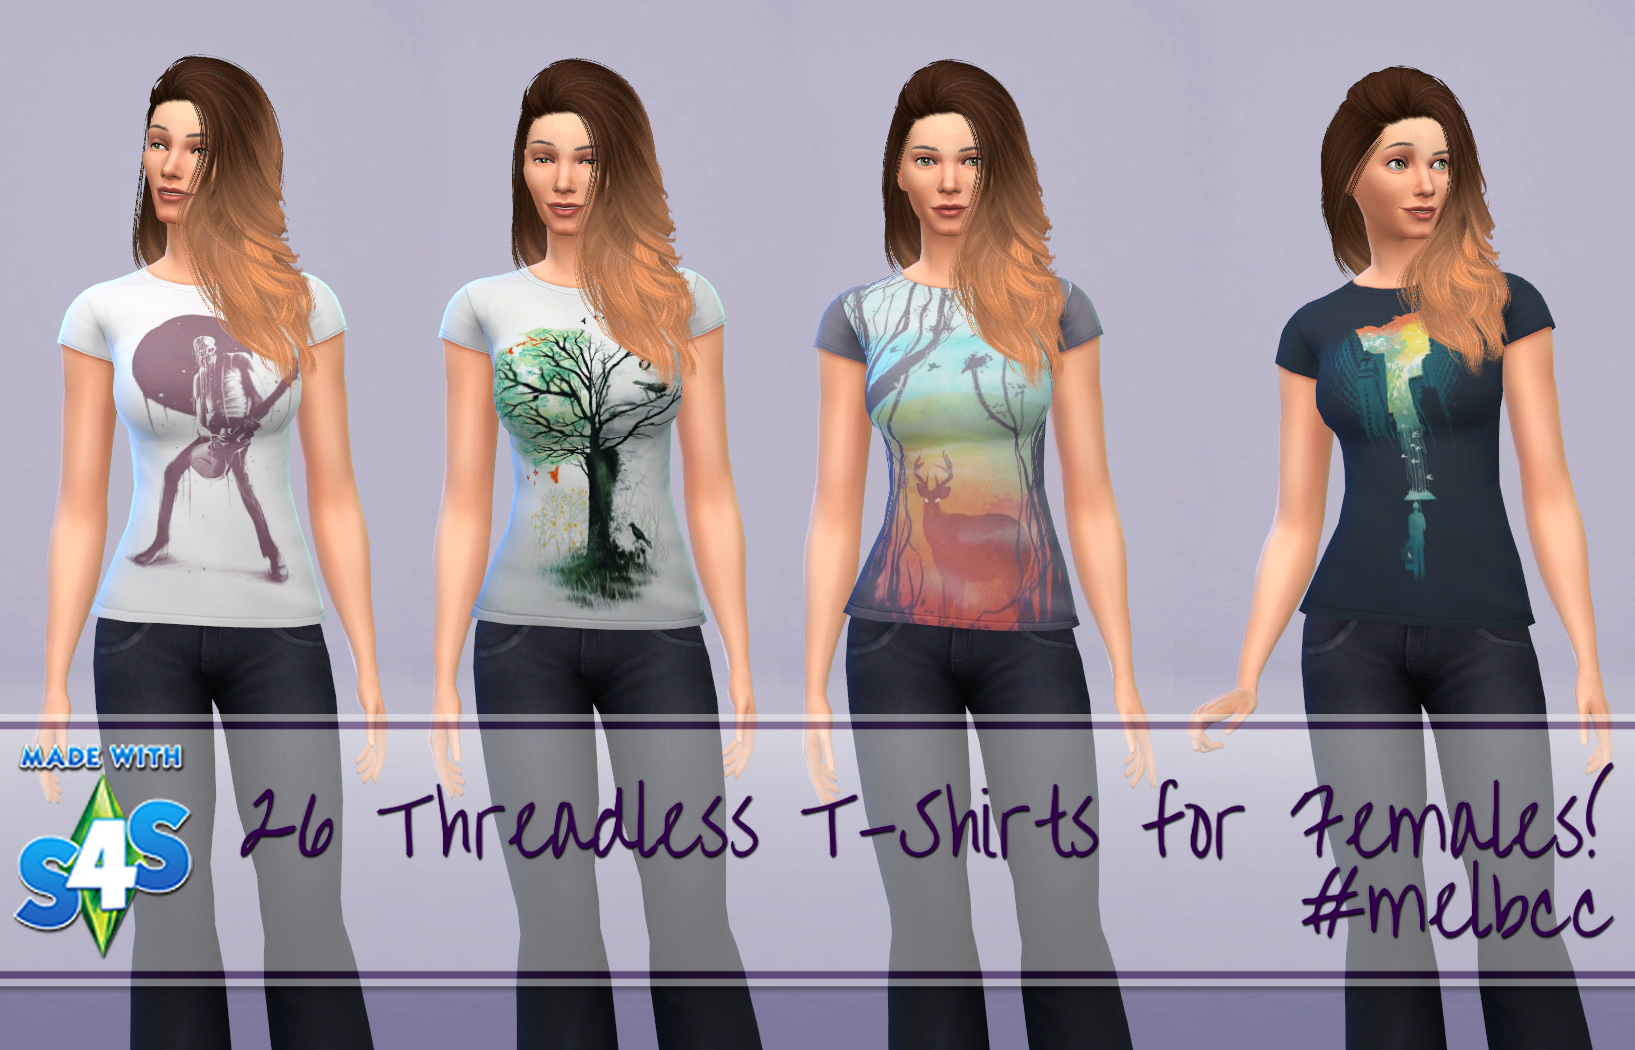 Mod Sims - 26 Threadless T-Shirts for